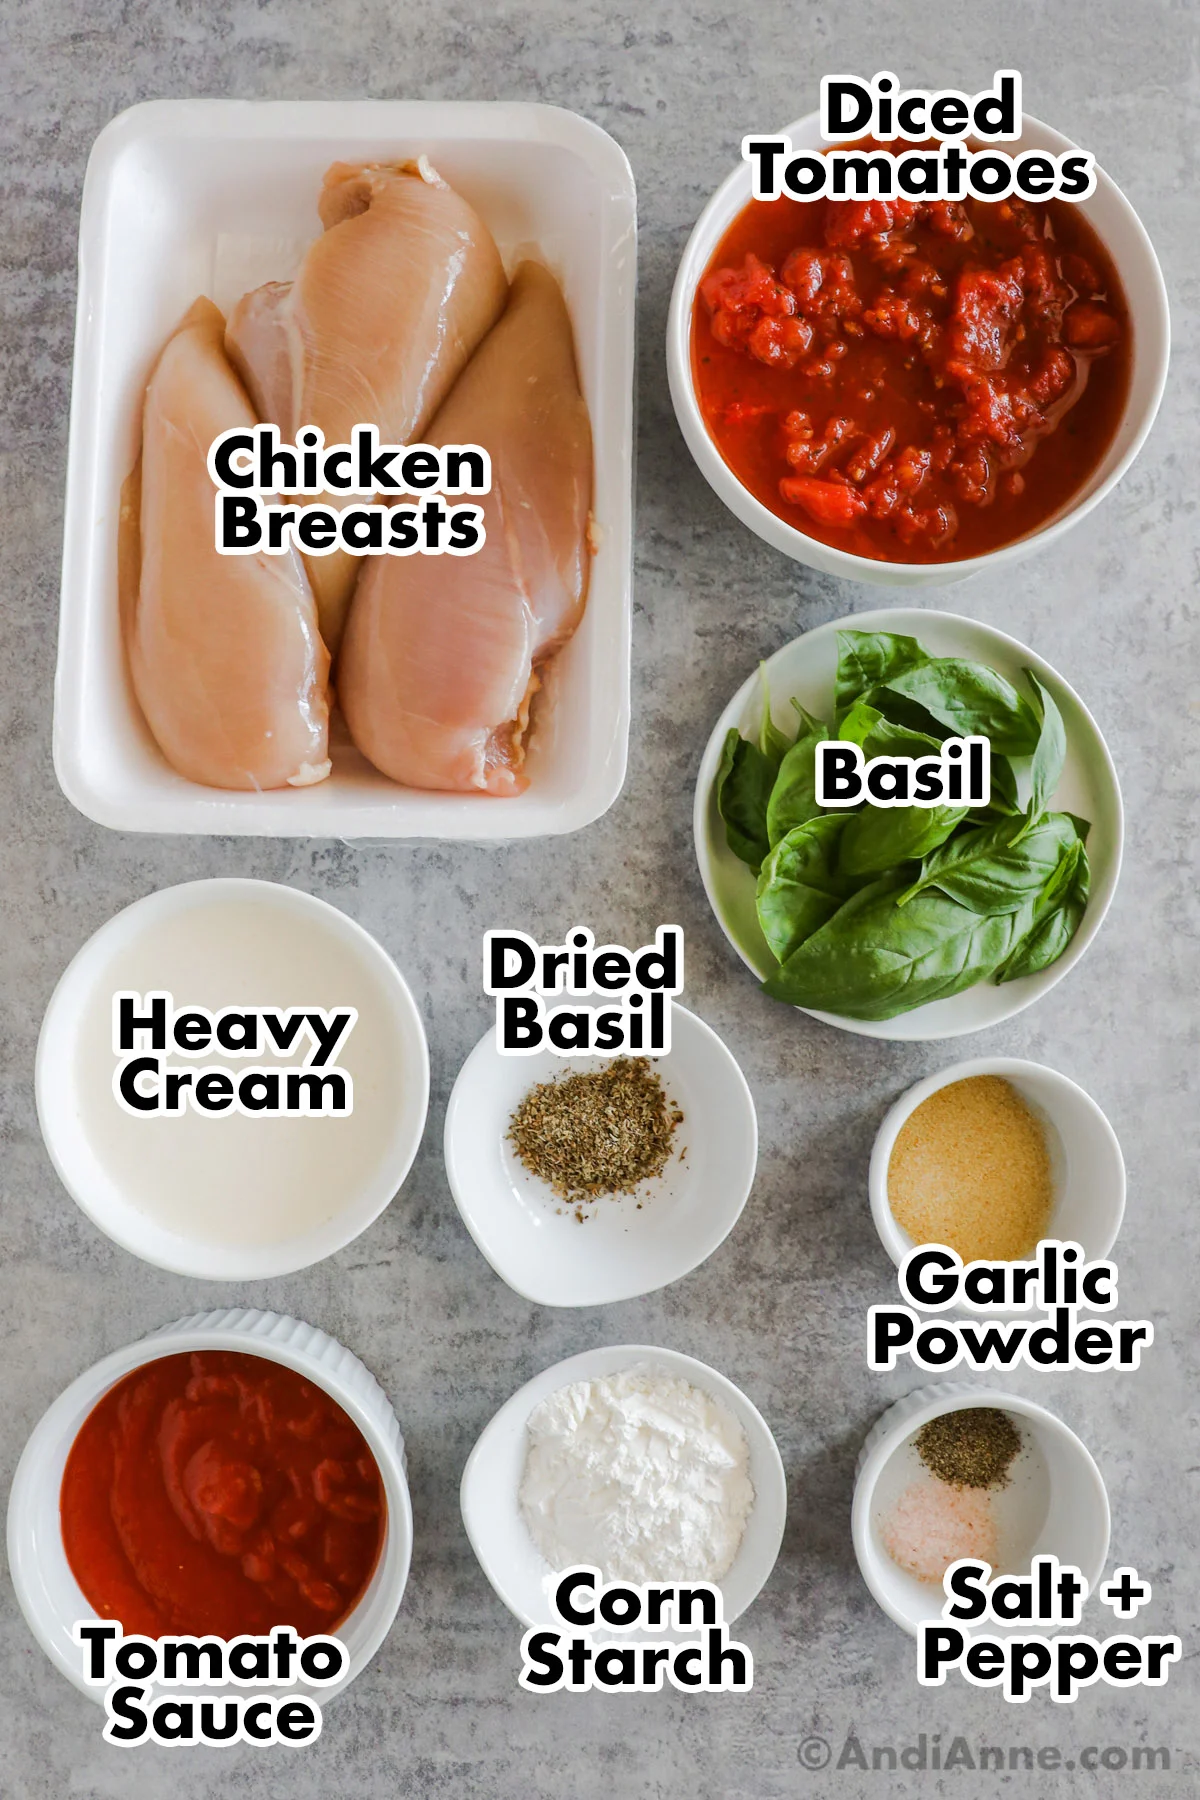 Overhead view of each ingredient in a separate bowl. Chicken breasts, tomatoes, fresh basil, dried basil, heavy cream, garlic powder, tomato sauce, corn starch, salt and pepper